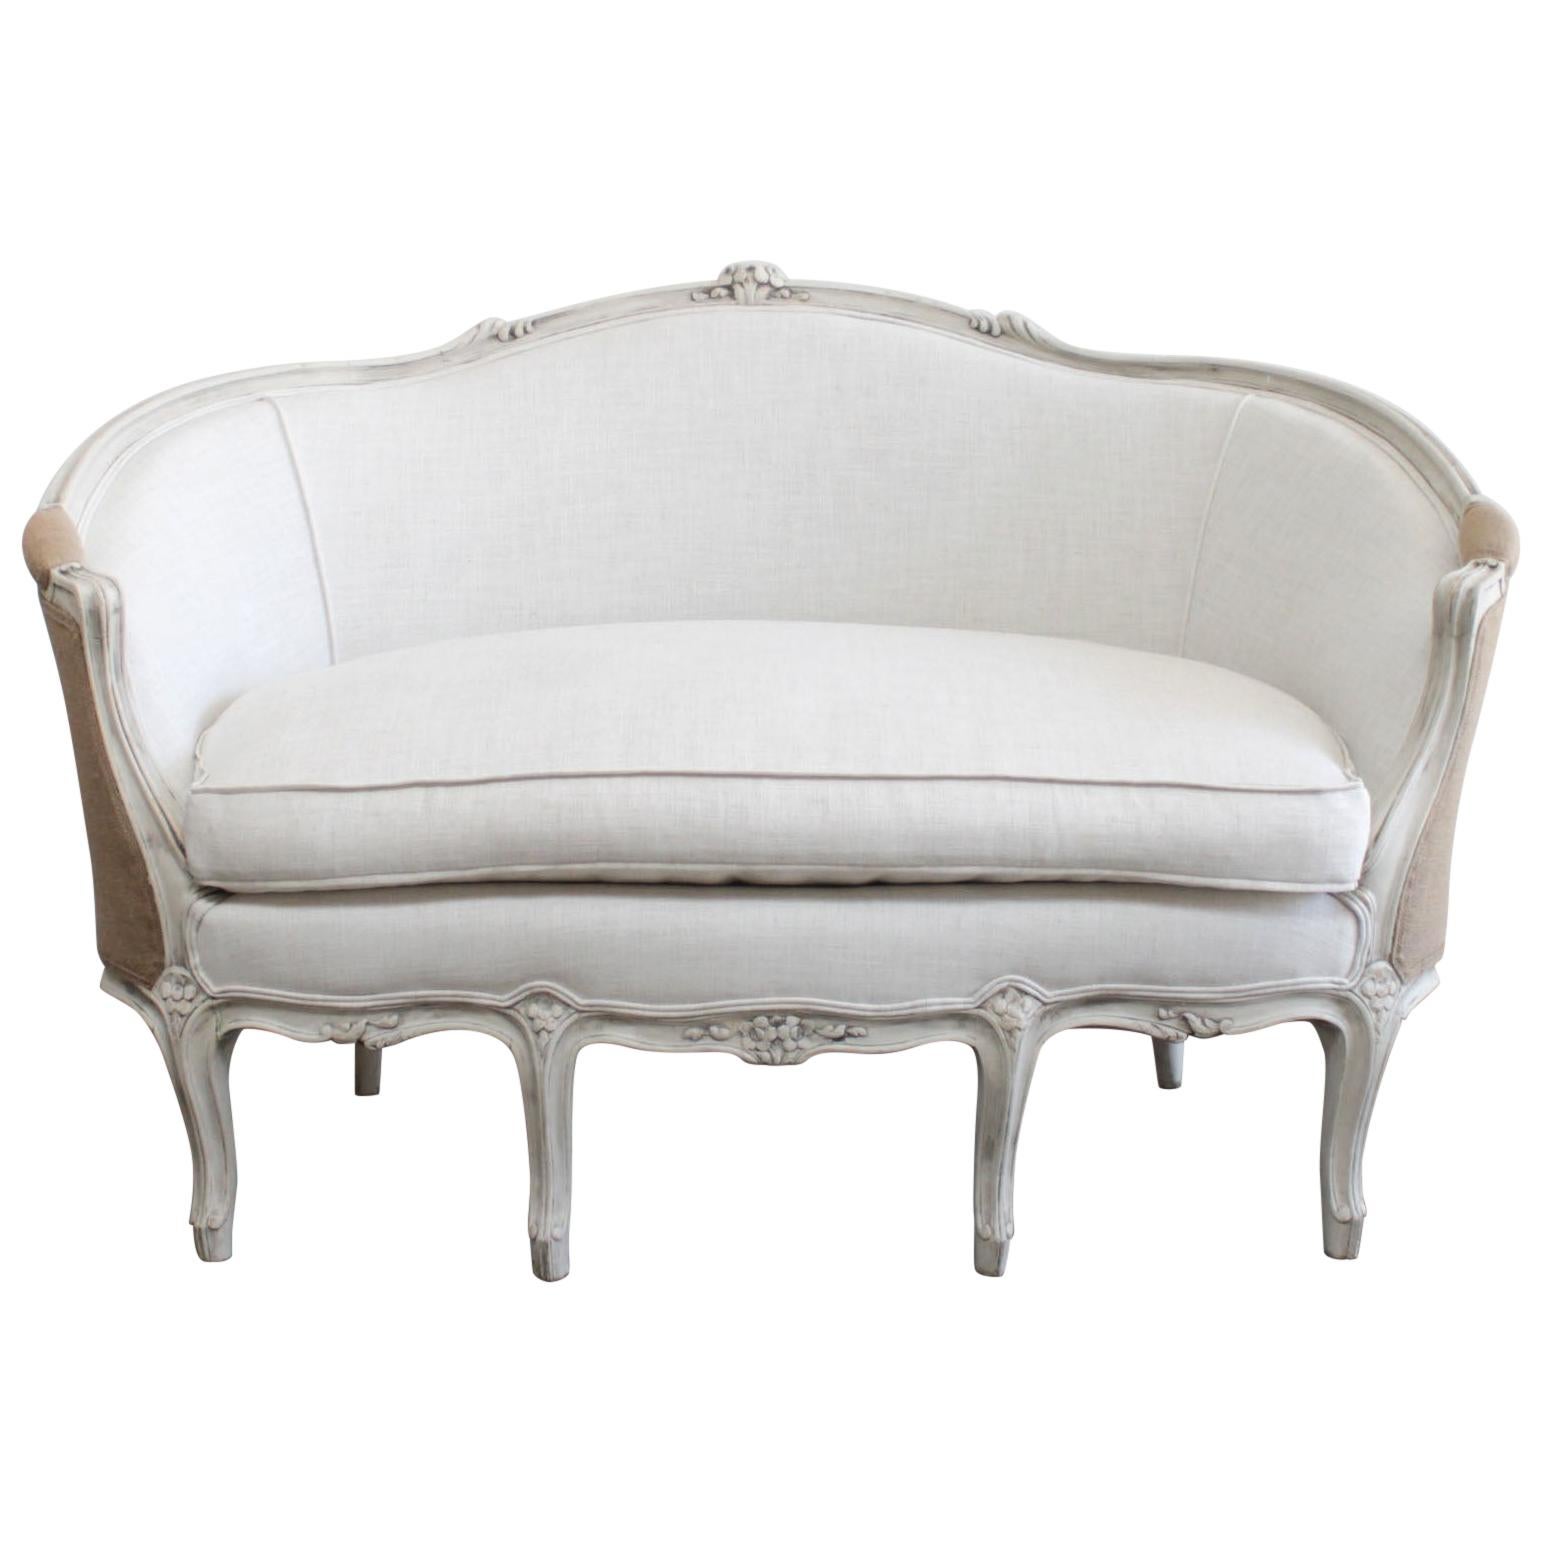 Vintage Painted and Upholstered Settee in the Louis XV Style